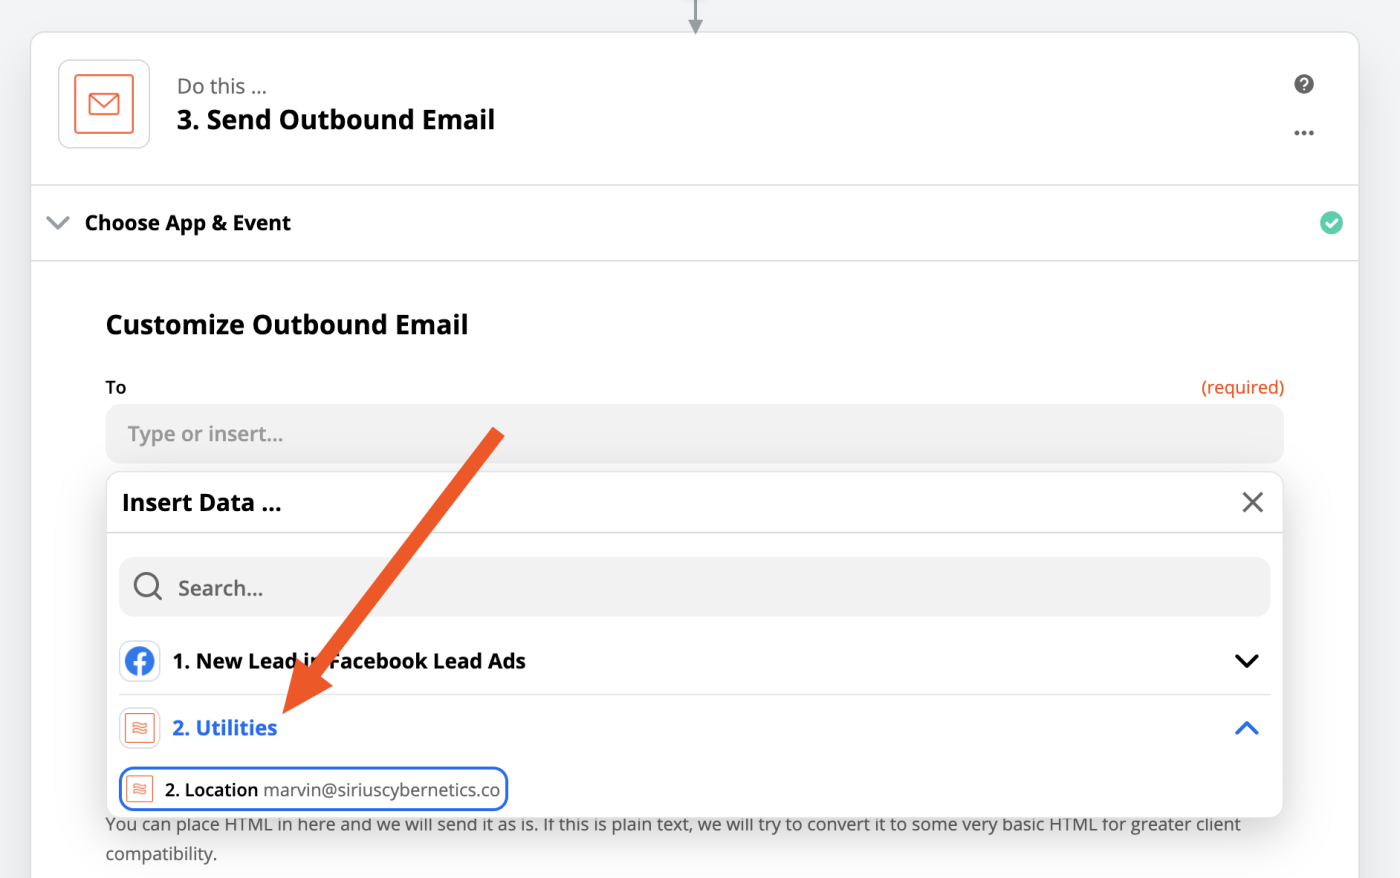 Arrow pointing from the To field in the Send Email to the values provided by the Utilities action, which should be the result of the Lookup Table.